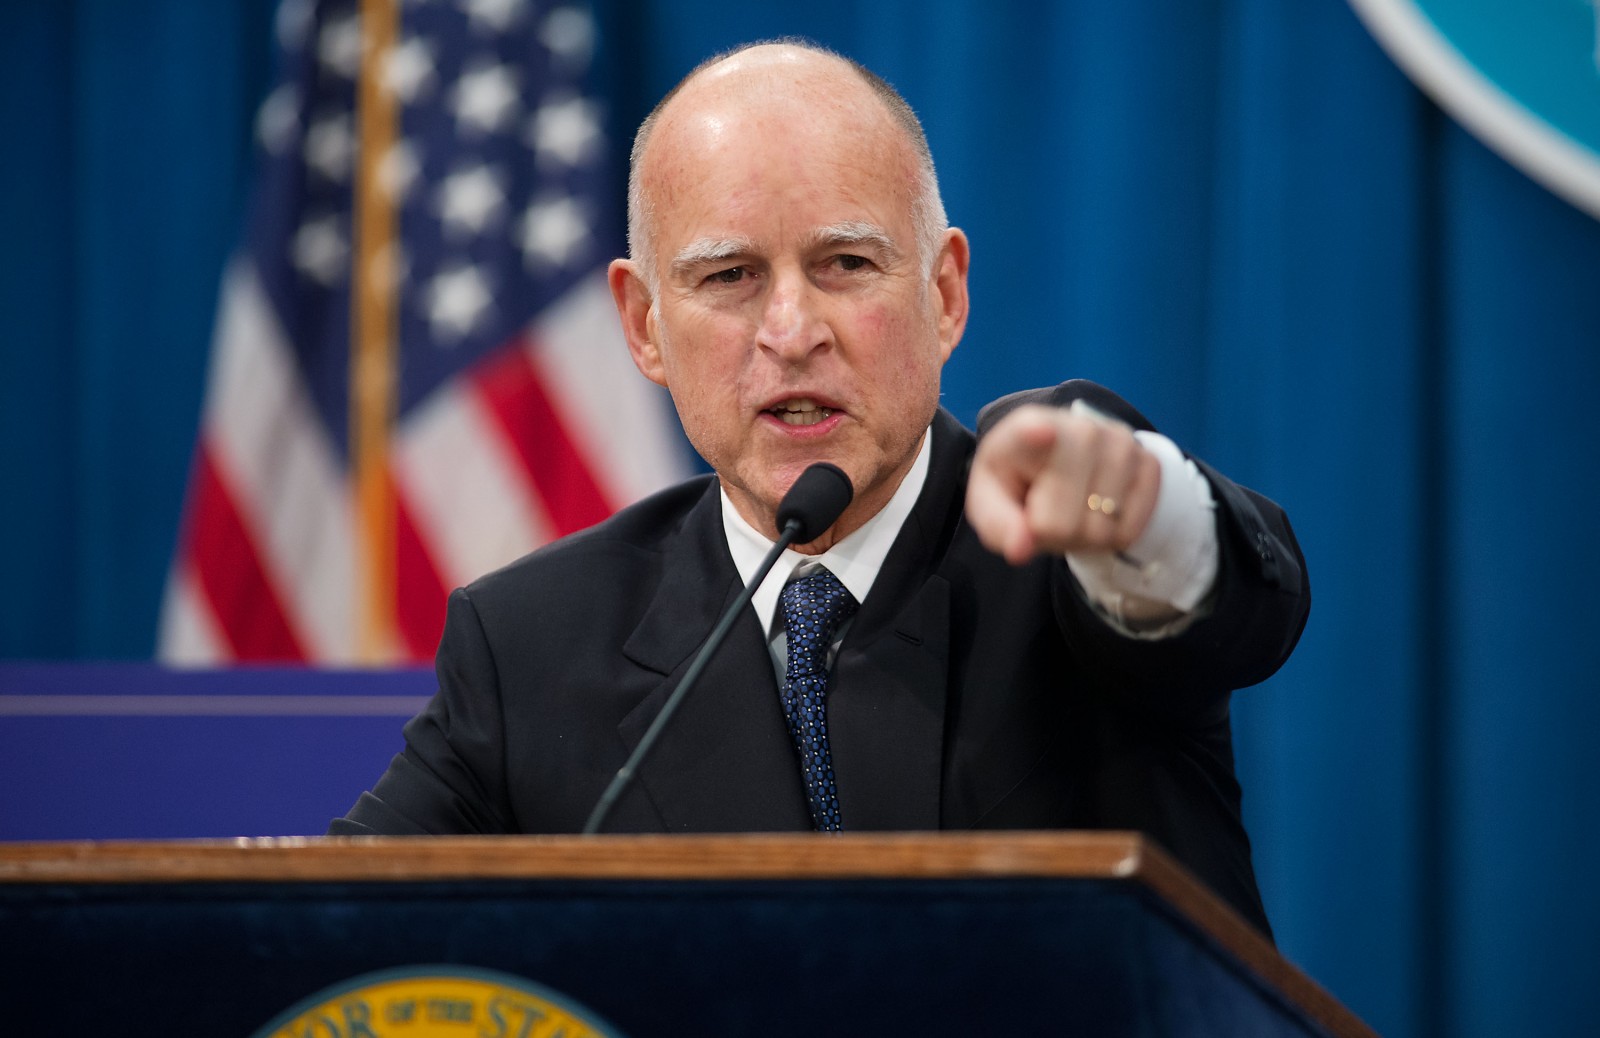 California Gov. Jerry Brown Wants to Be Climate Leader While Fracking